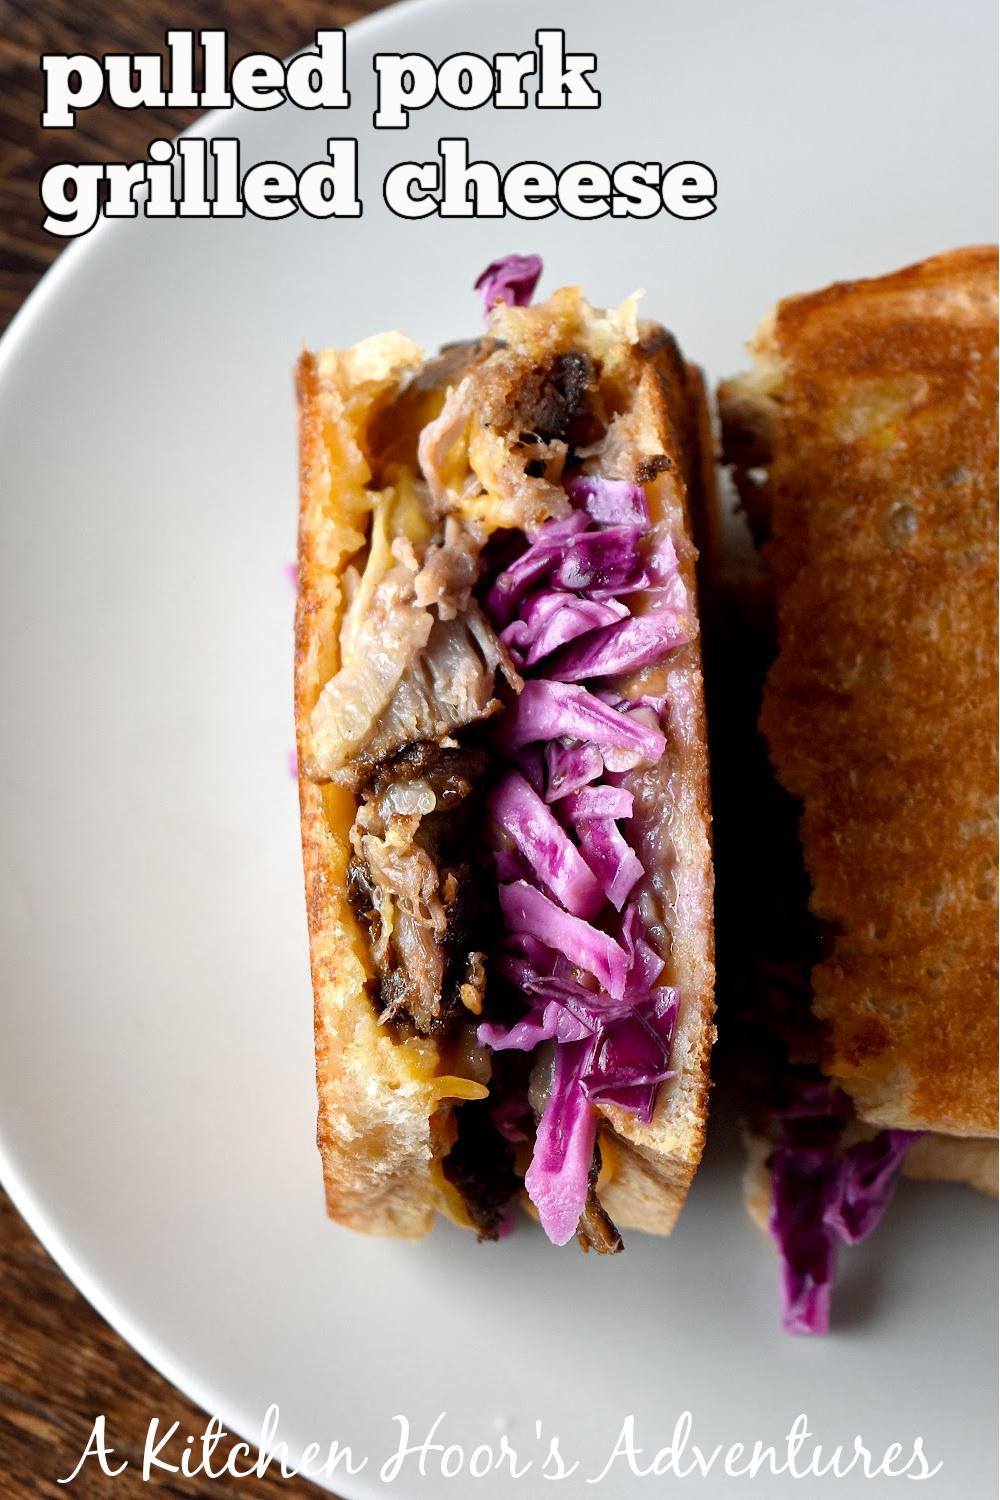 Pulled pork grilled cheese: The perfect combination of savory and cheesy! Make this delectable sandwich today!  #PulledPorkGrilledCheese #CheesyYum #Delicious #CheesyHeaven #CheesyDreams #grilledcheesedreams #grilledcheeseYum
